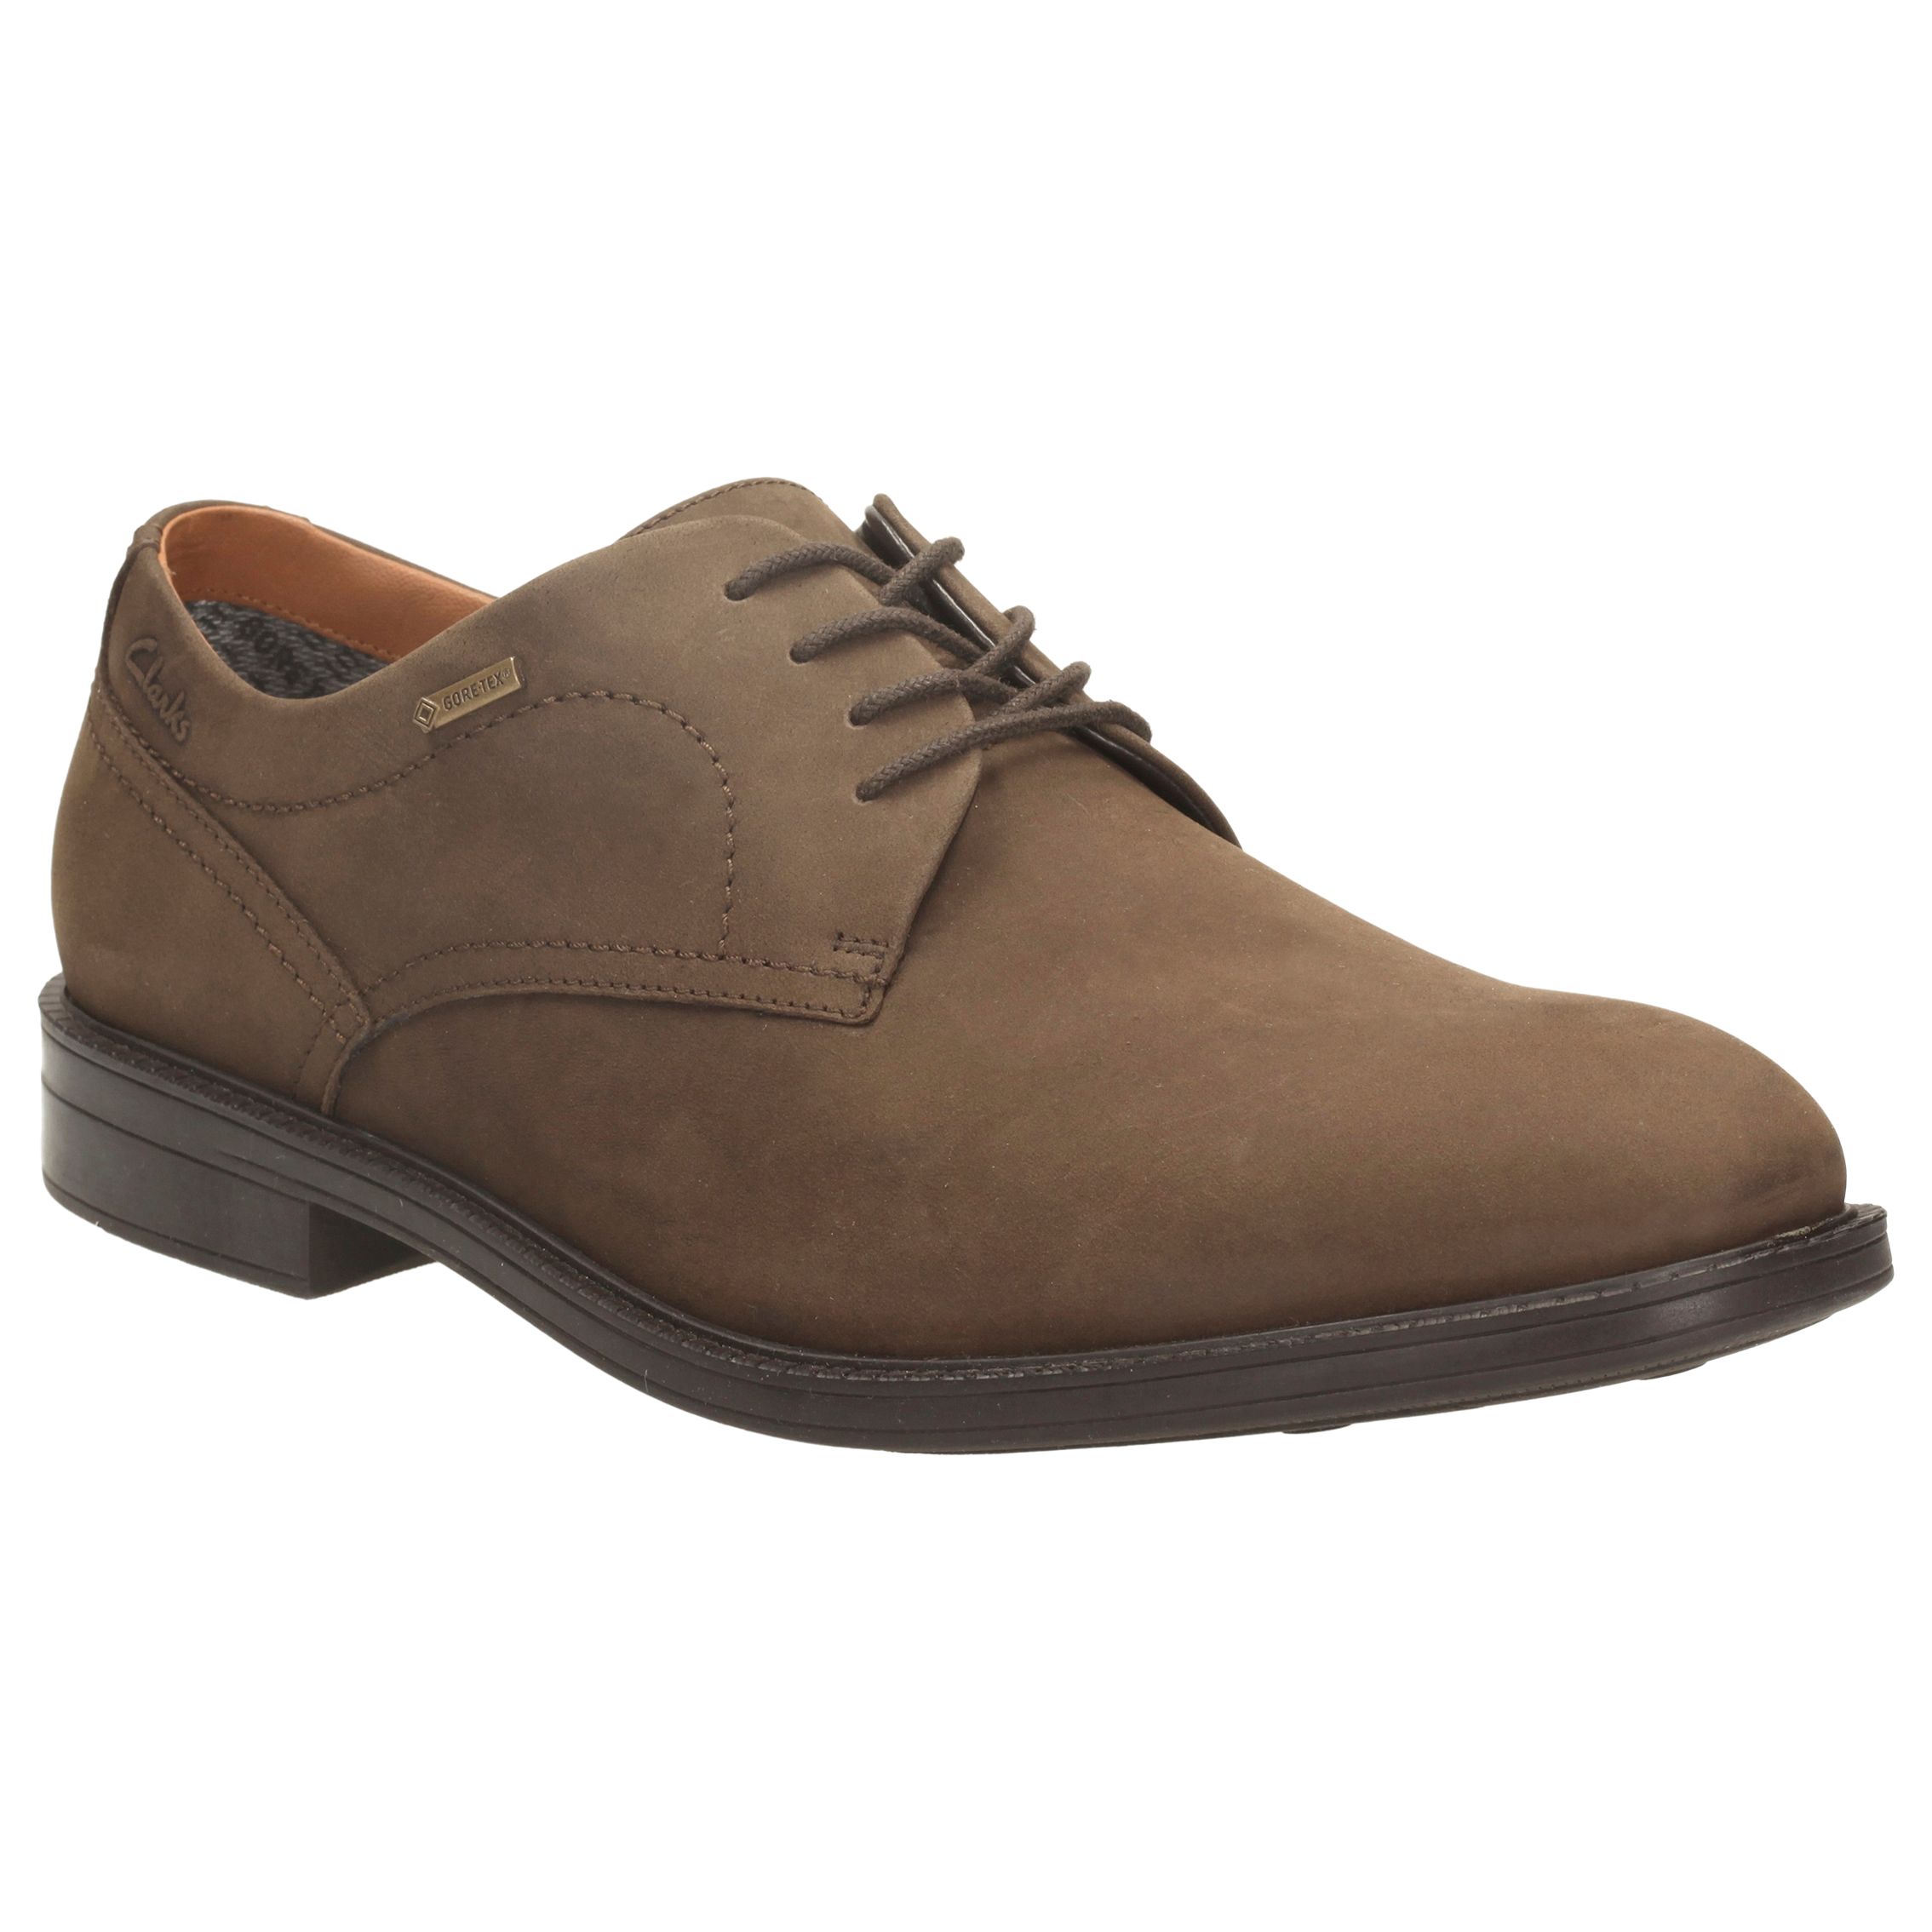 clarks chilver leather chukka boots